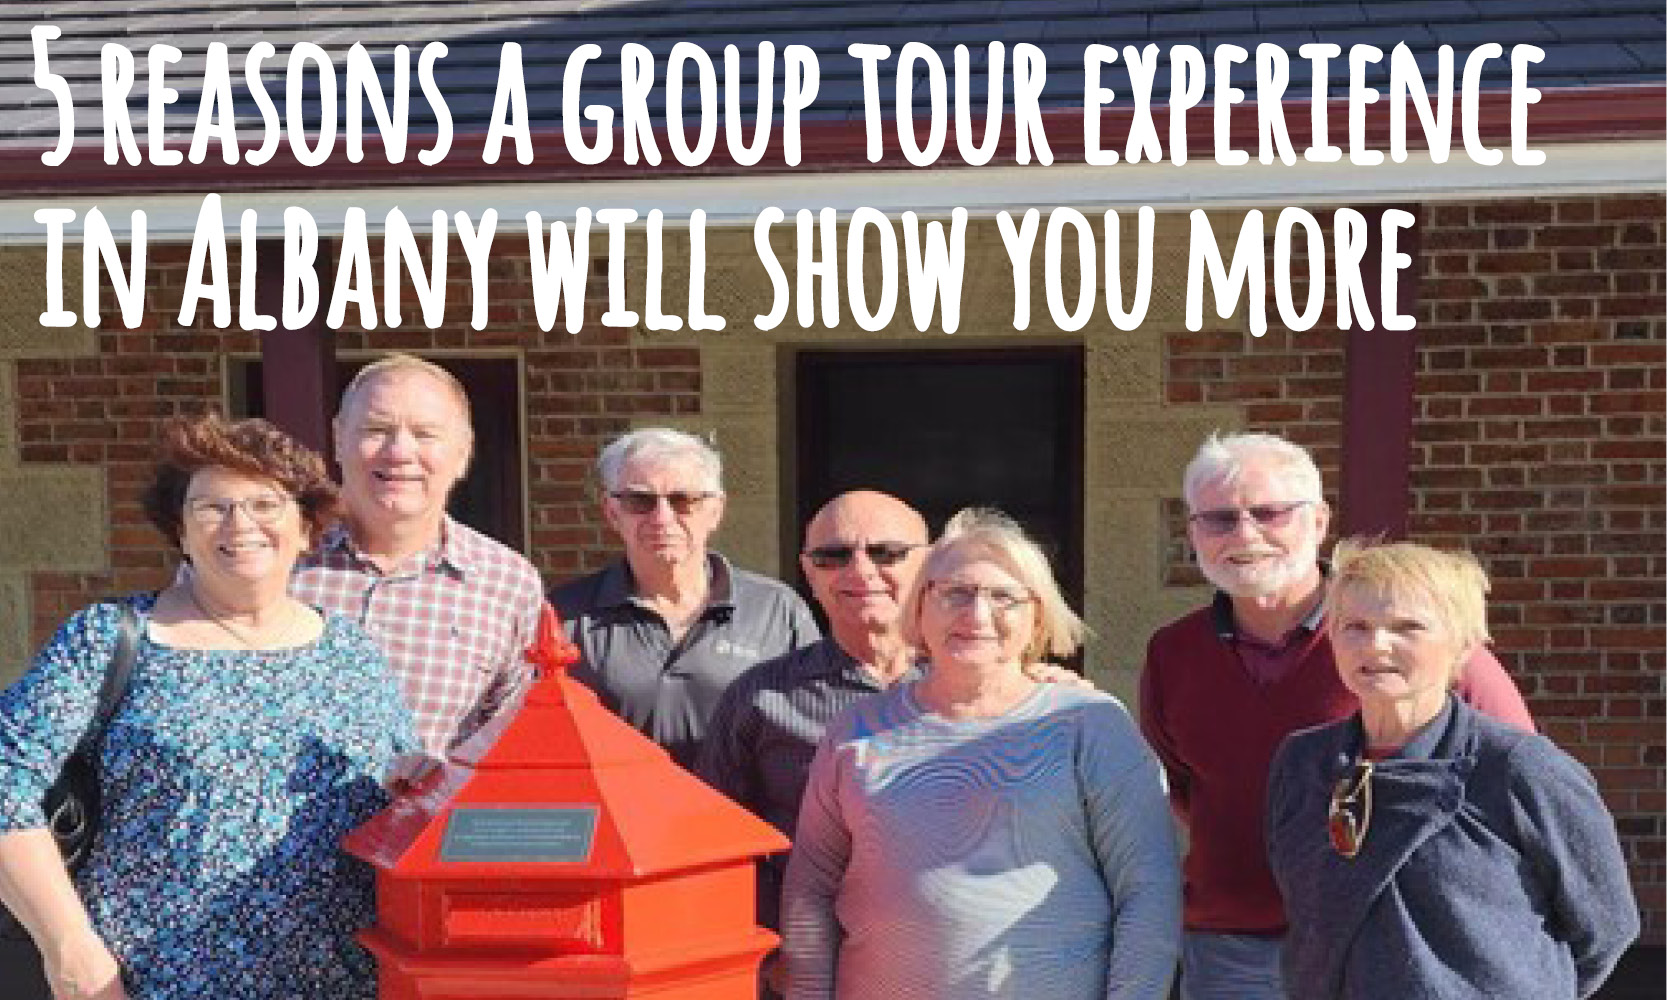 5 reasons a group tour experience in Albany WA will show you more